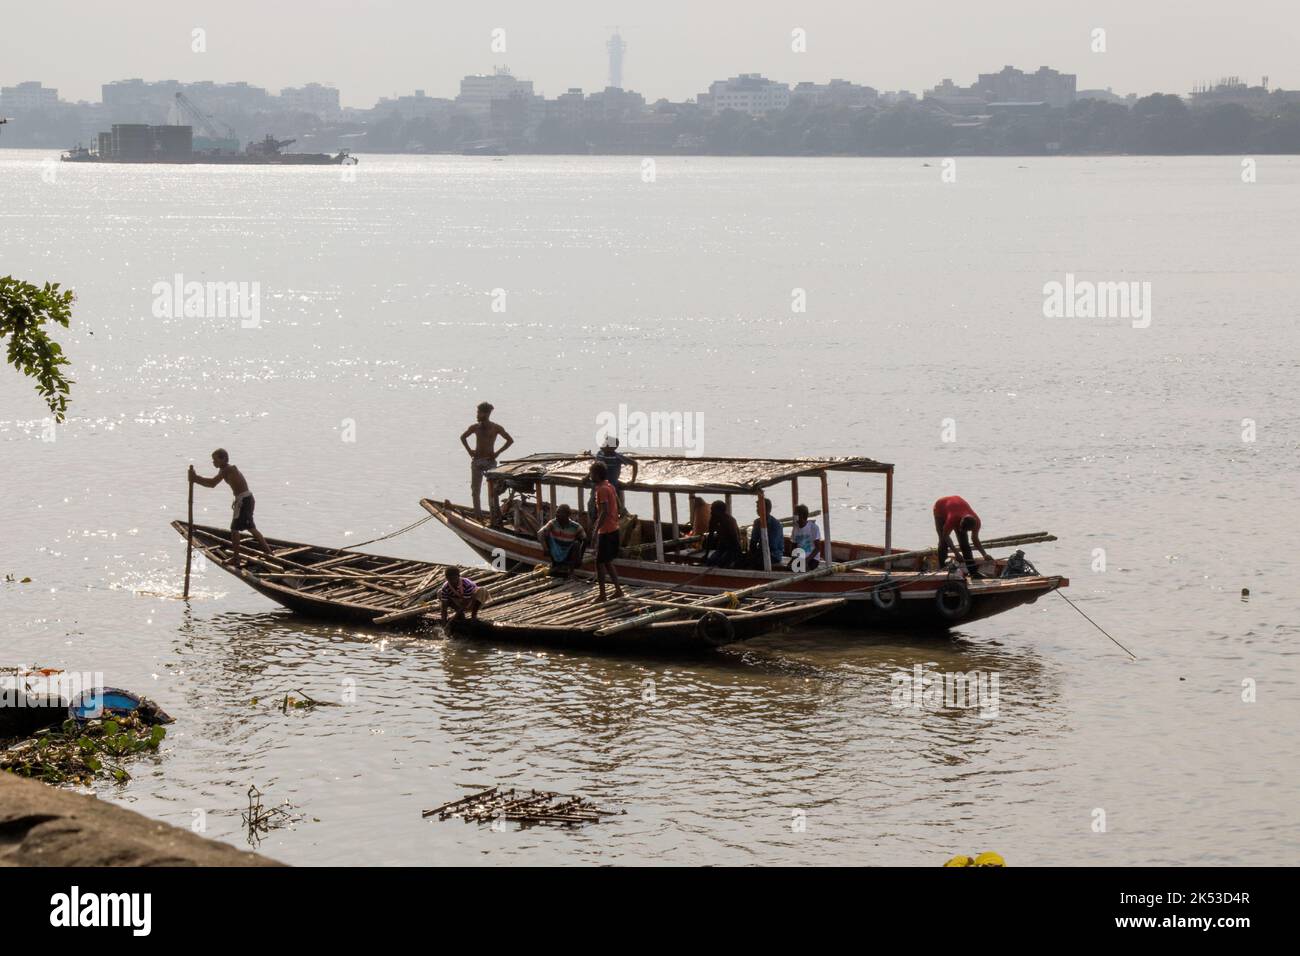 Preparations for the immersion of the Durga statue of Shobhabazar Rajbari in Kolkata are underway at Ganga Ghat. Stock Photo